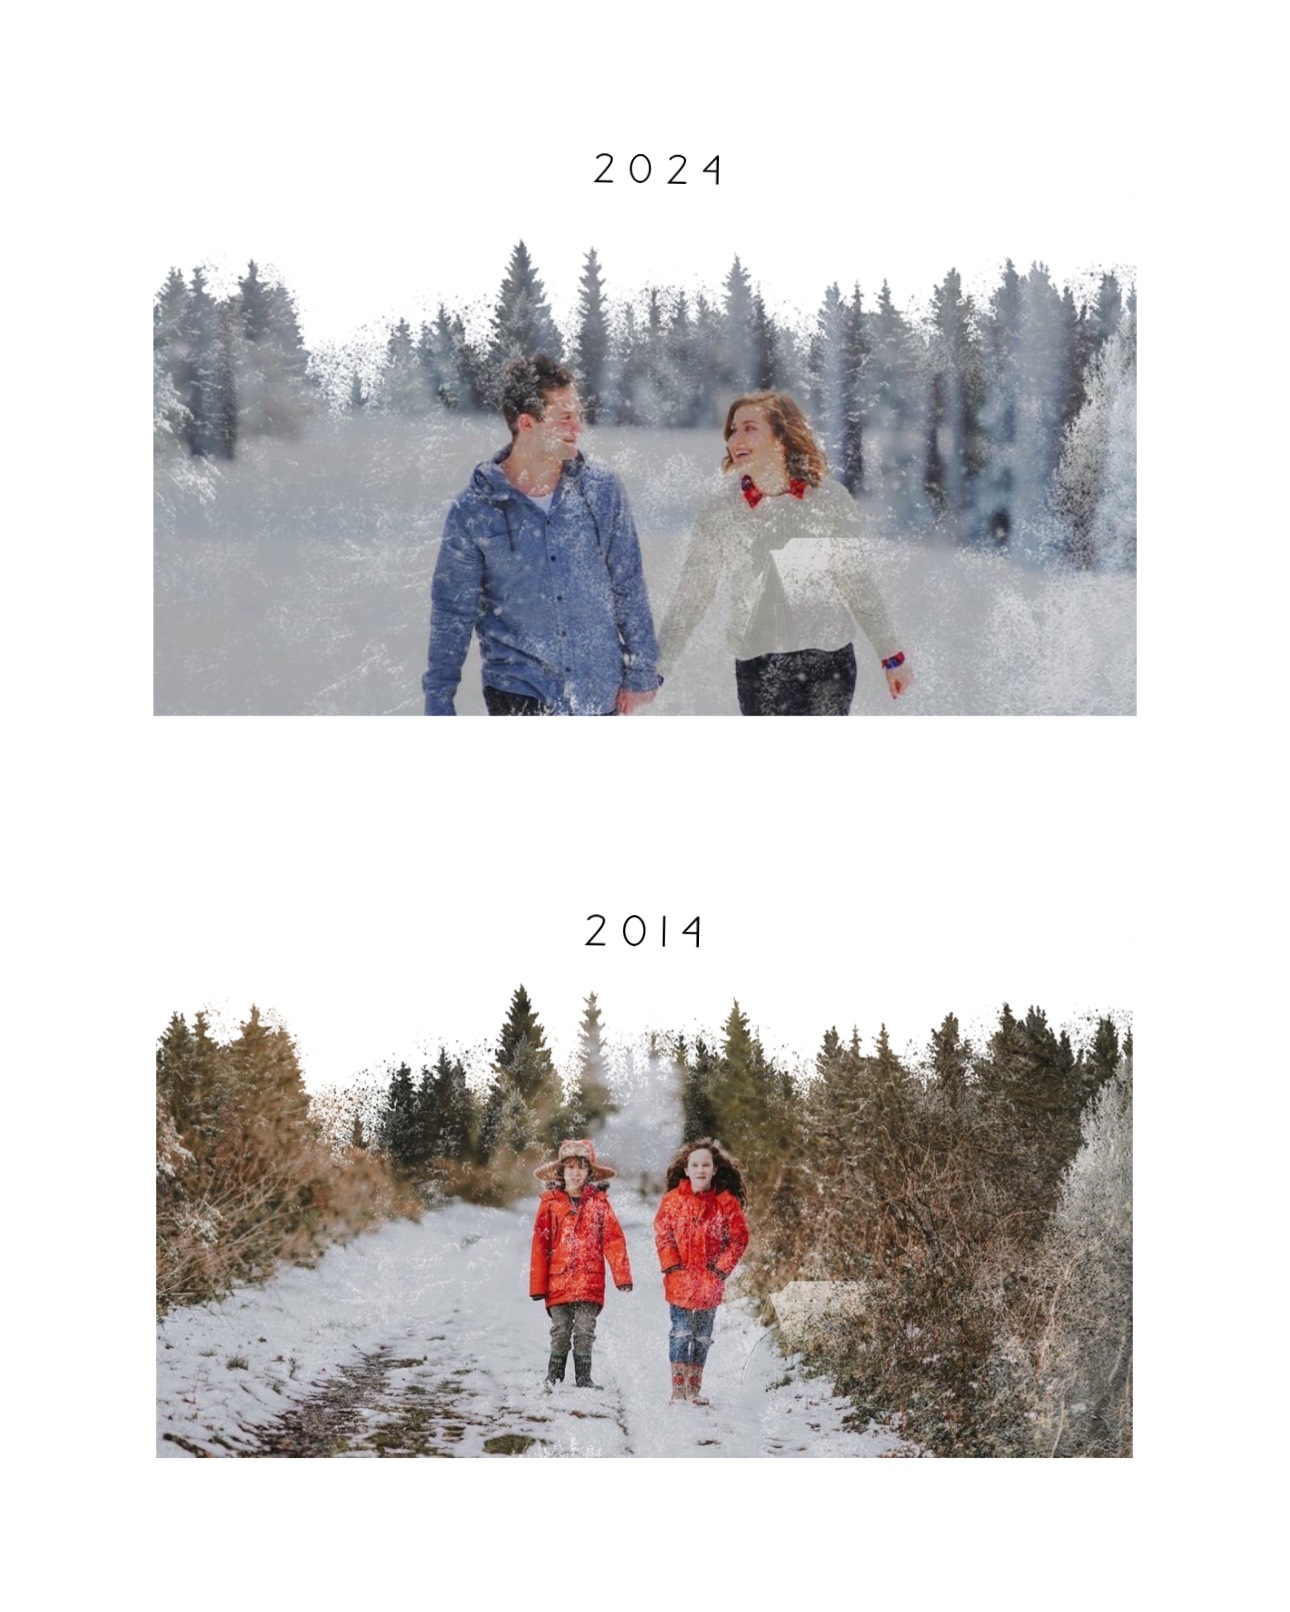 A Couple Walking Through The Snow In The Woods Winter Wonderland Template